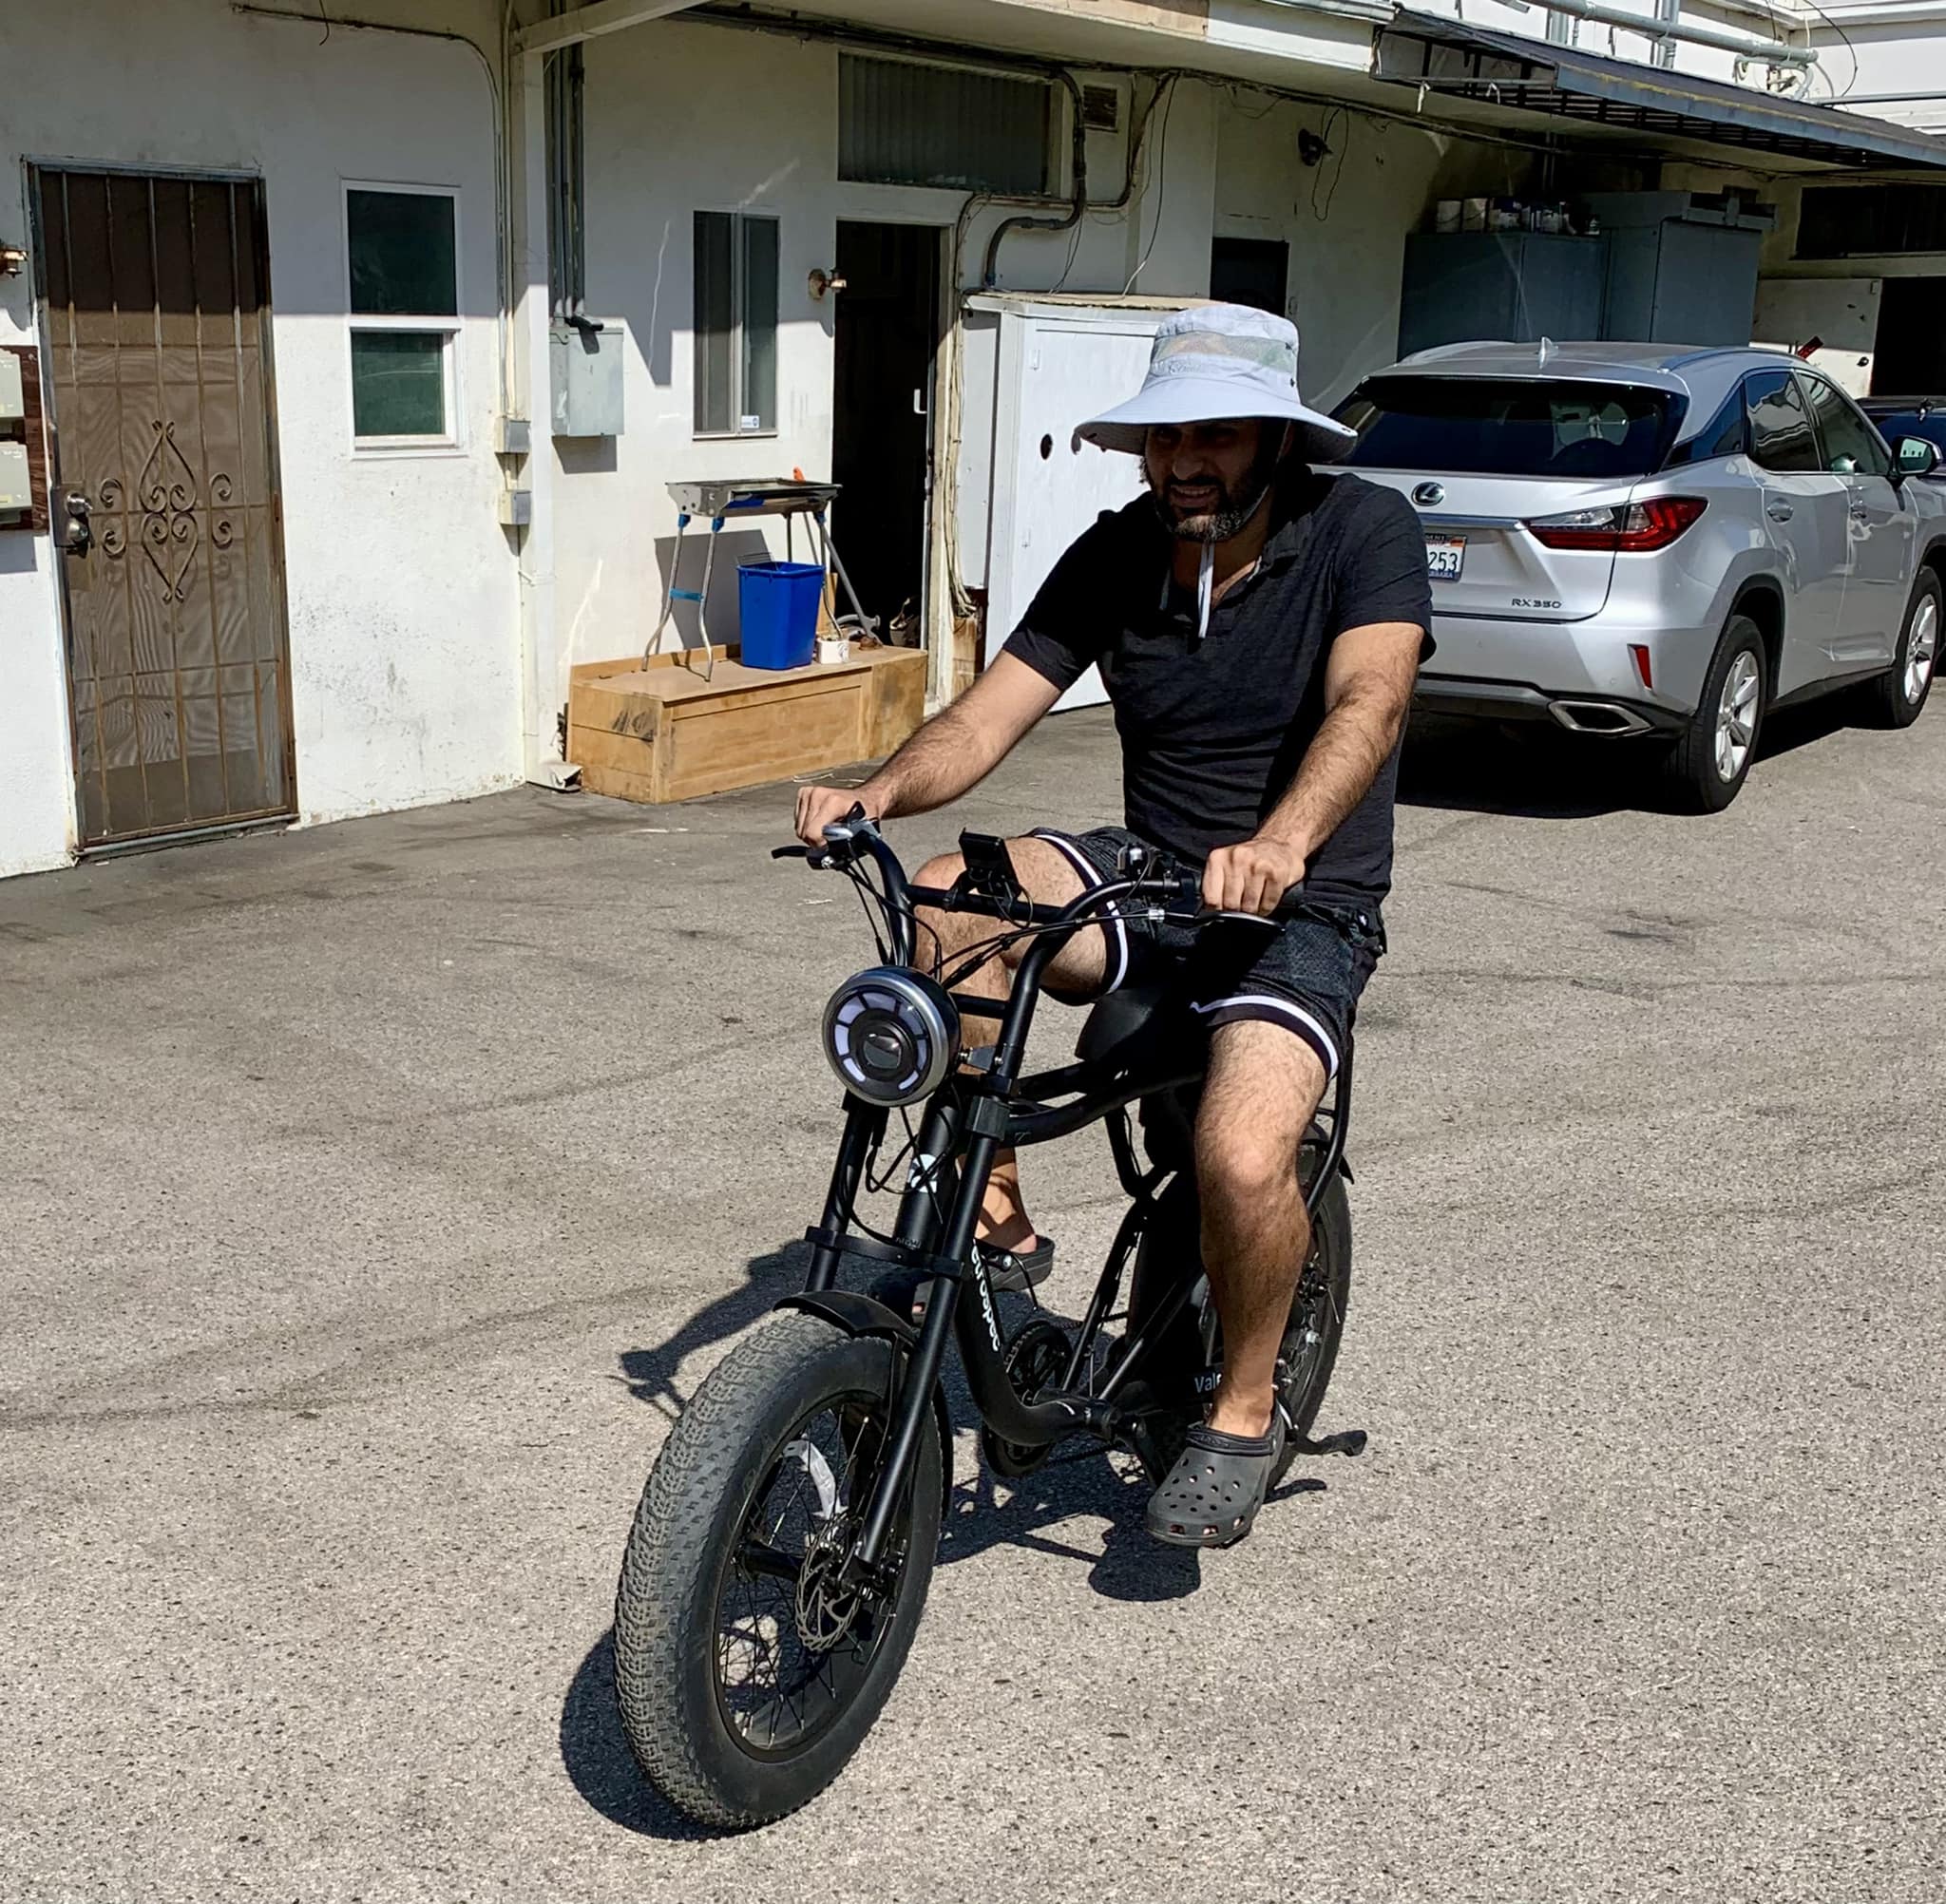 My son tries his new e-bike behind the store in Isla Vista where he bought it